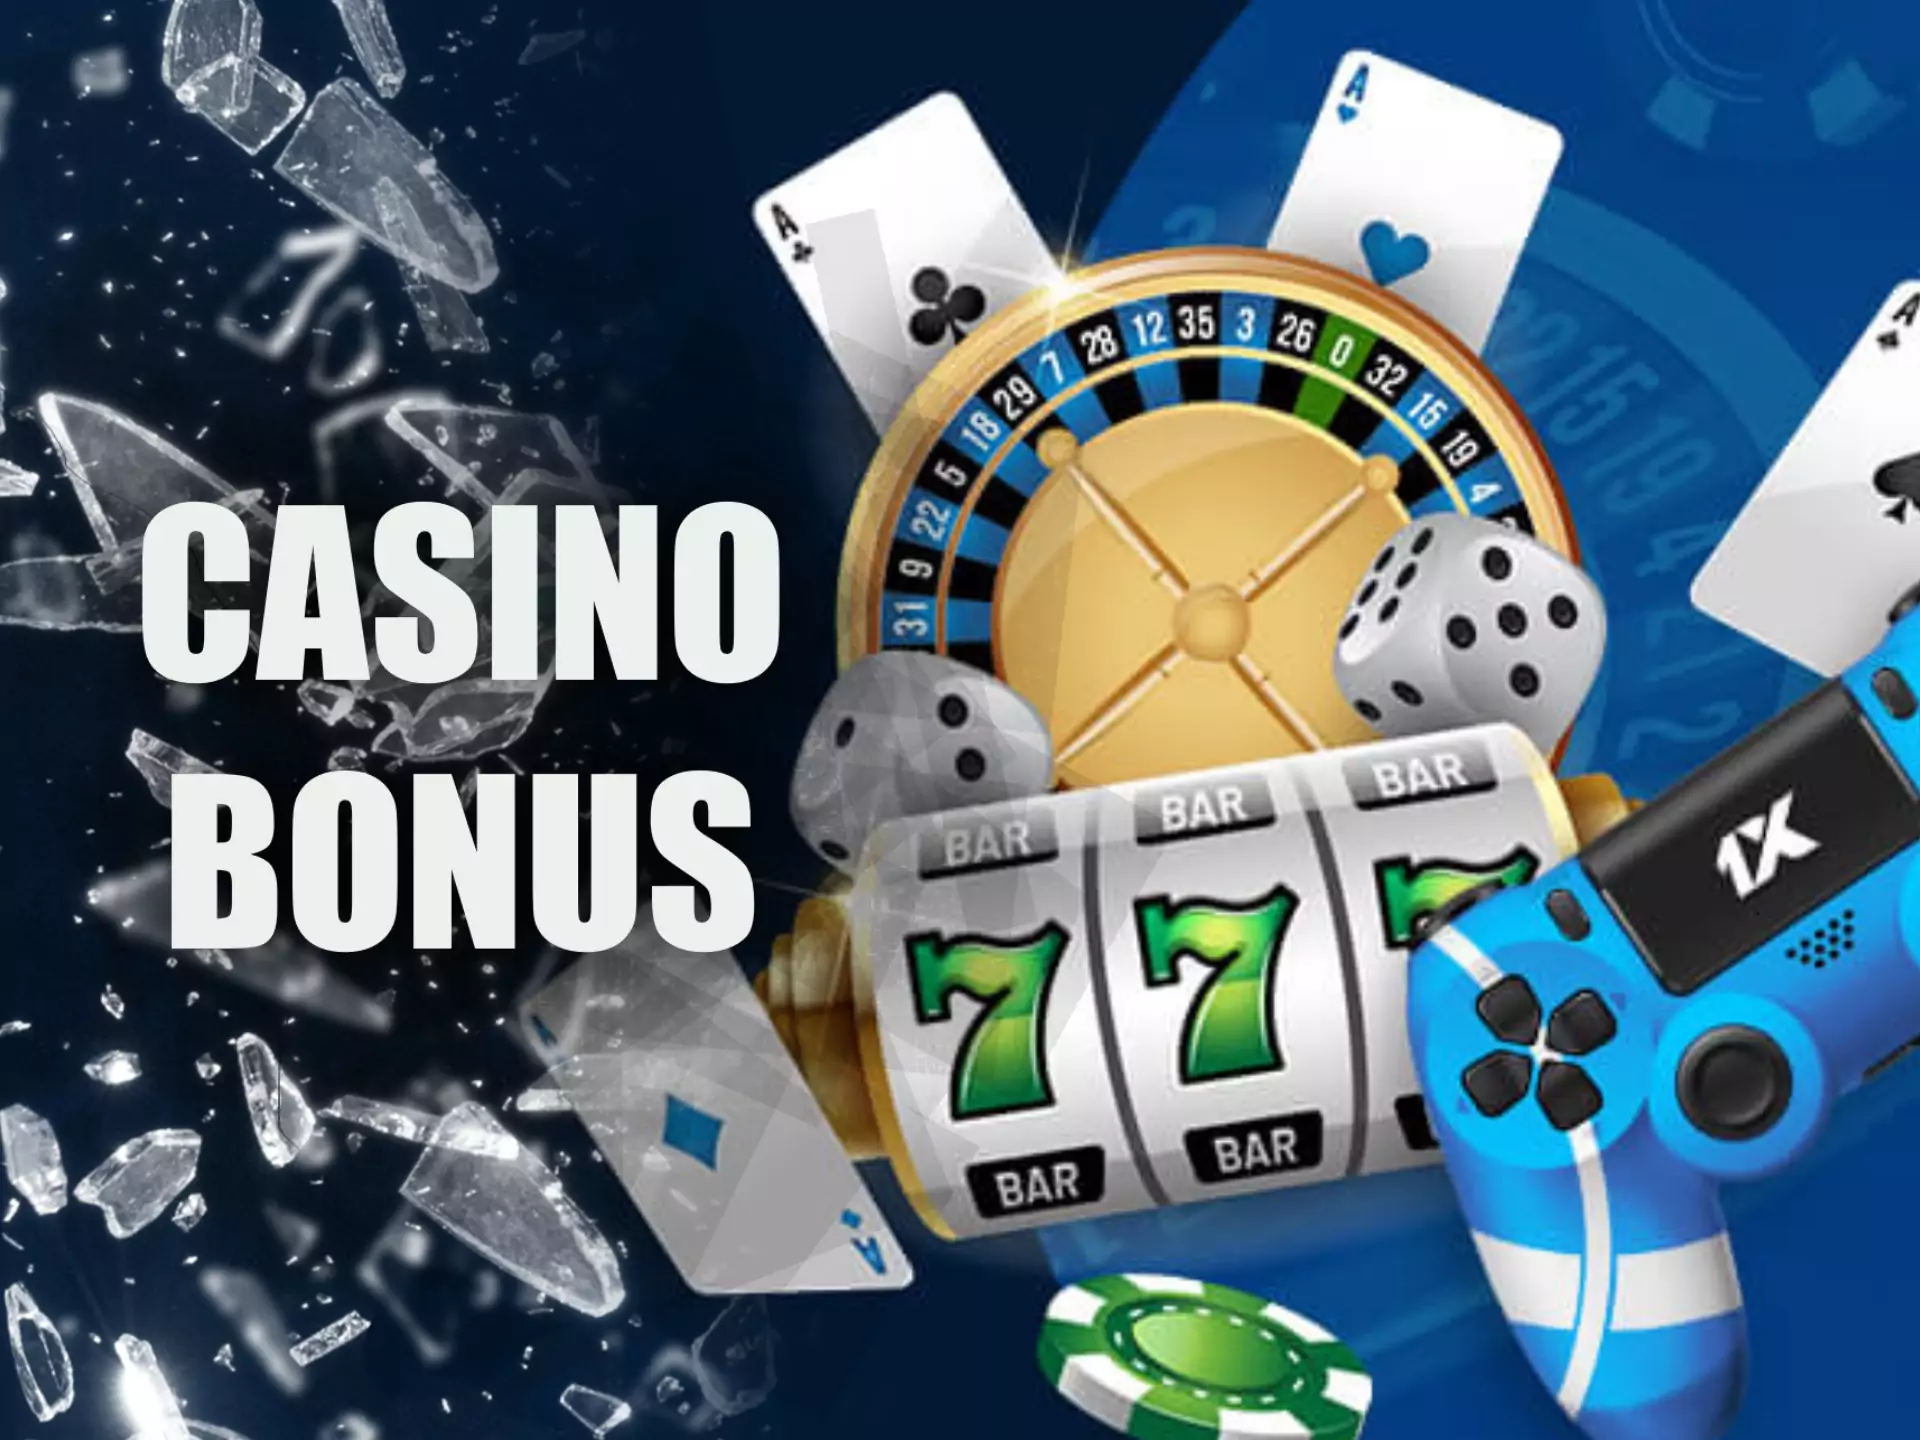 Casino bonus will give an advantage in some slots at 1xbet.